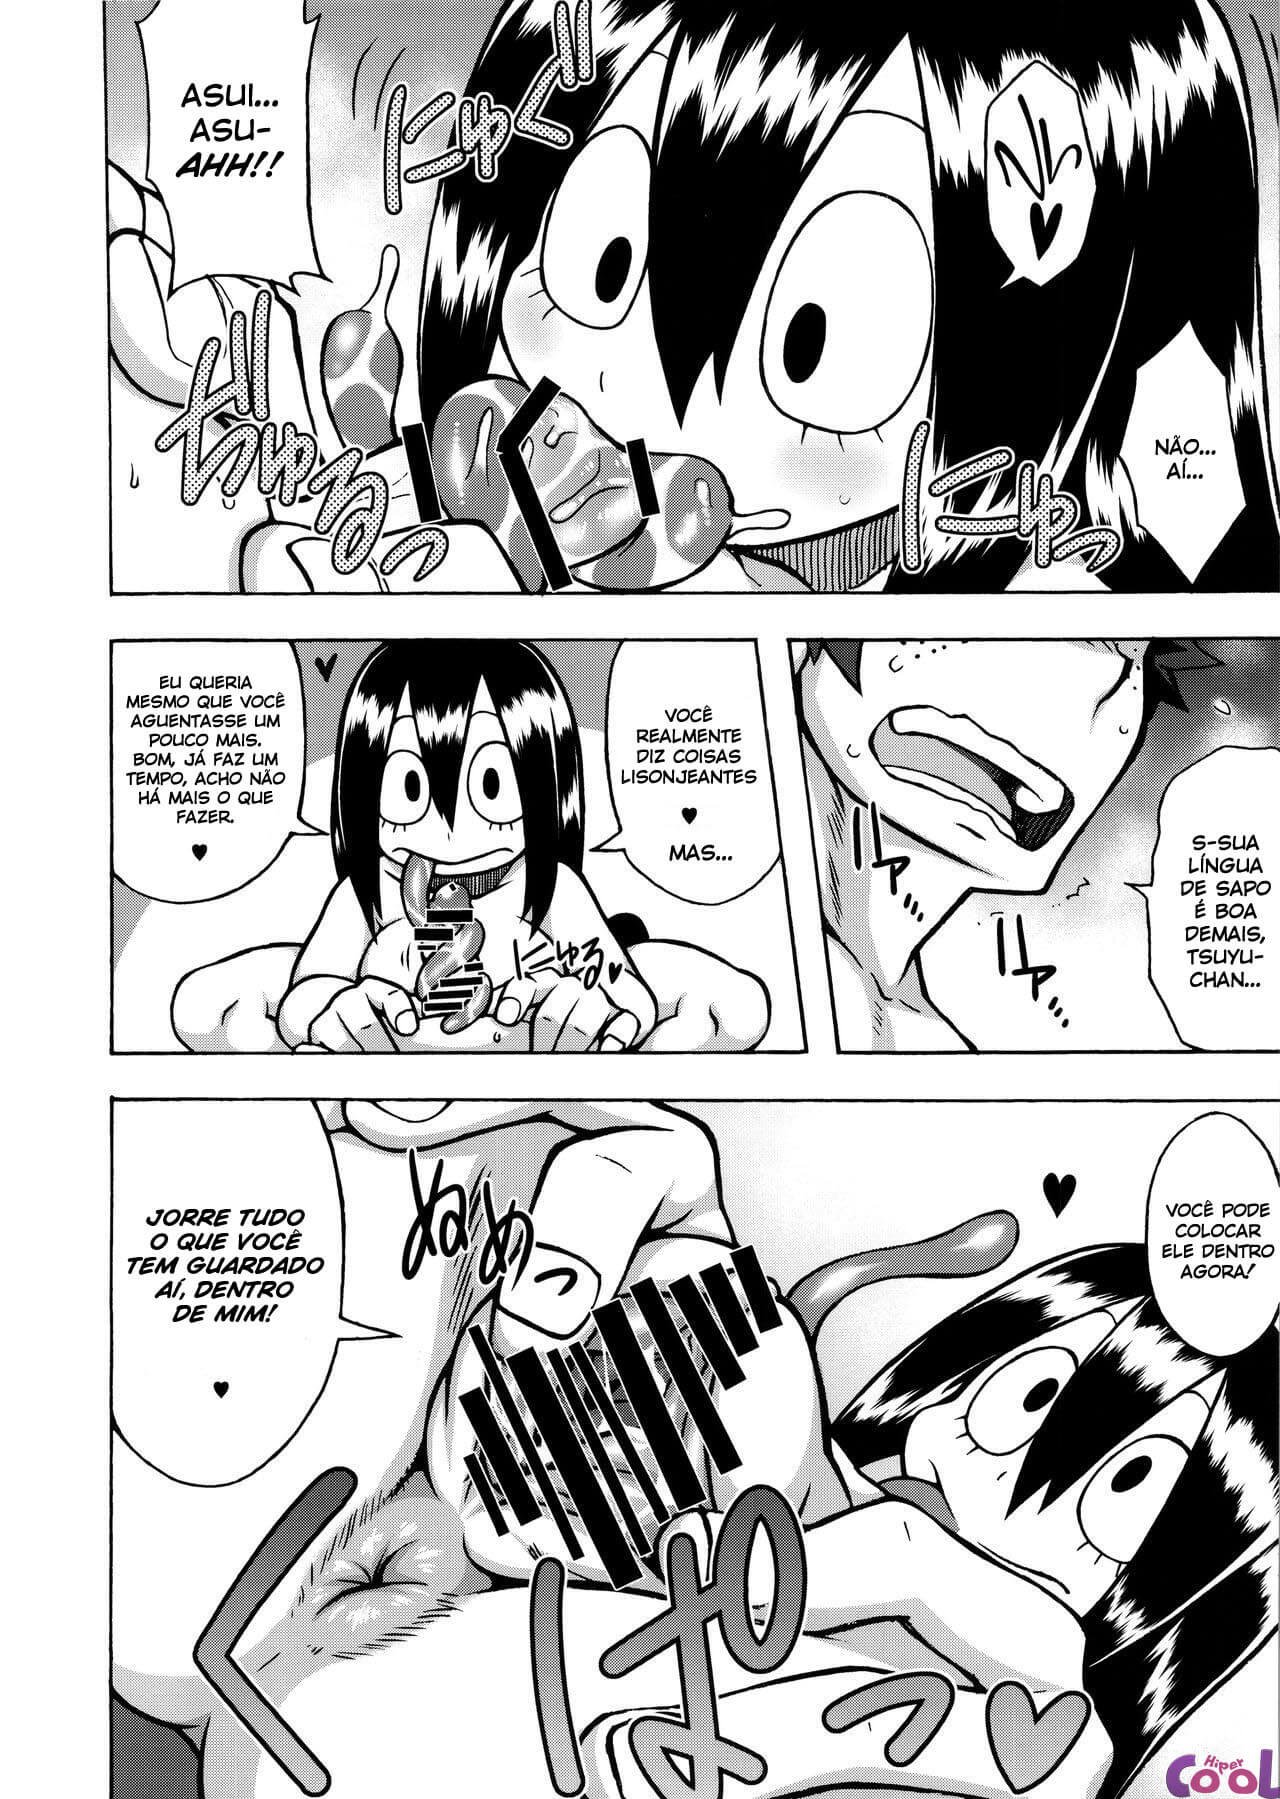 froppy-chapter-01-page-38.jpg